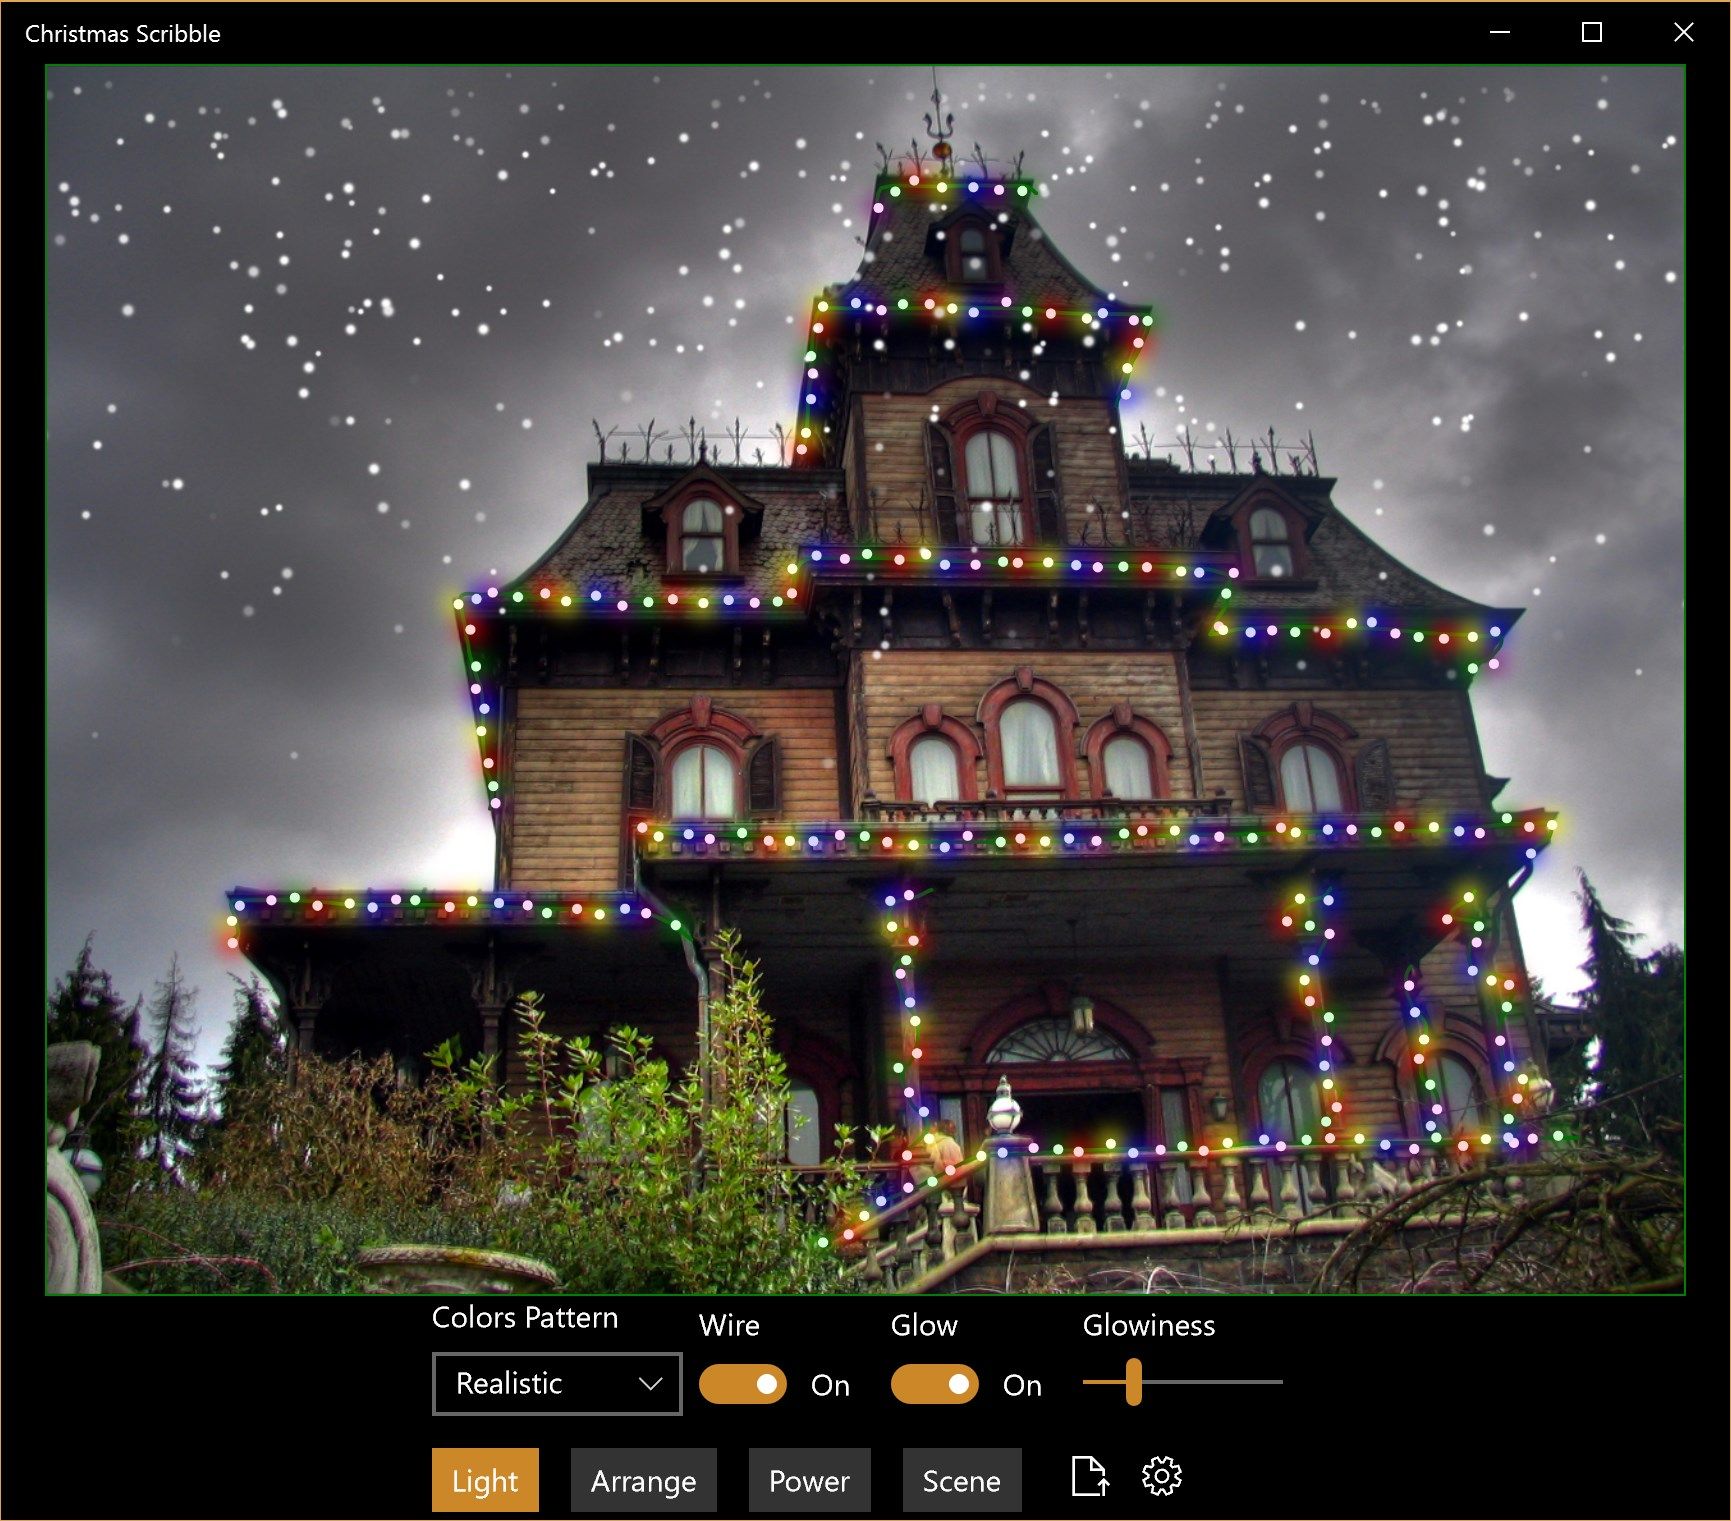 This foreboding mansion looks much cheerier adorned with lights! Uses the "realistic" color scheme.